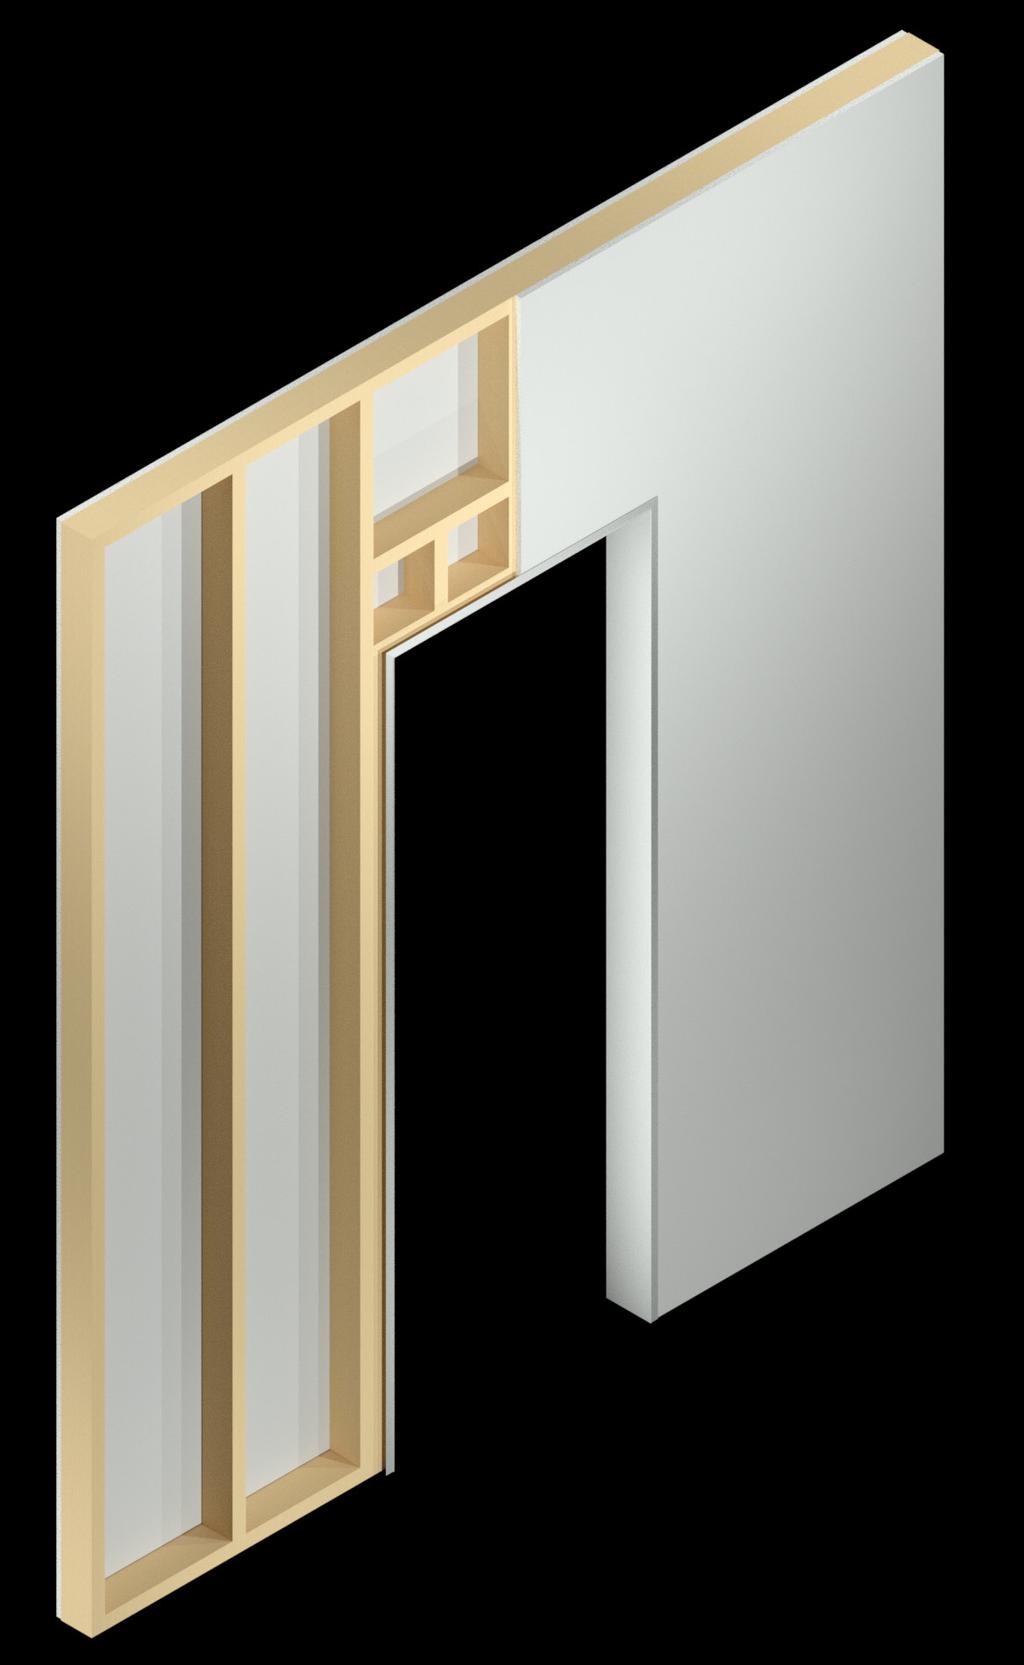 INSTALLATION DETAILS CASED OPENING Fry Reglet's Cased Opening provides a sharp, crisp appearance with no visible trims,